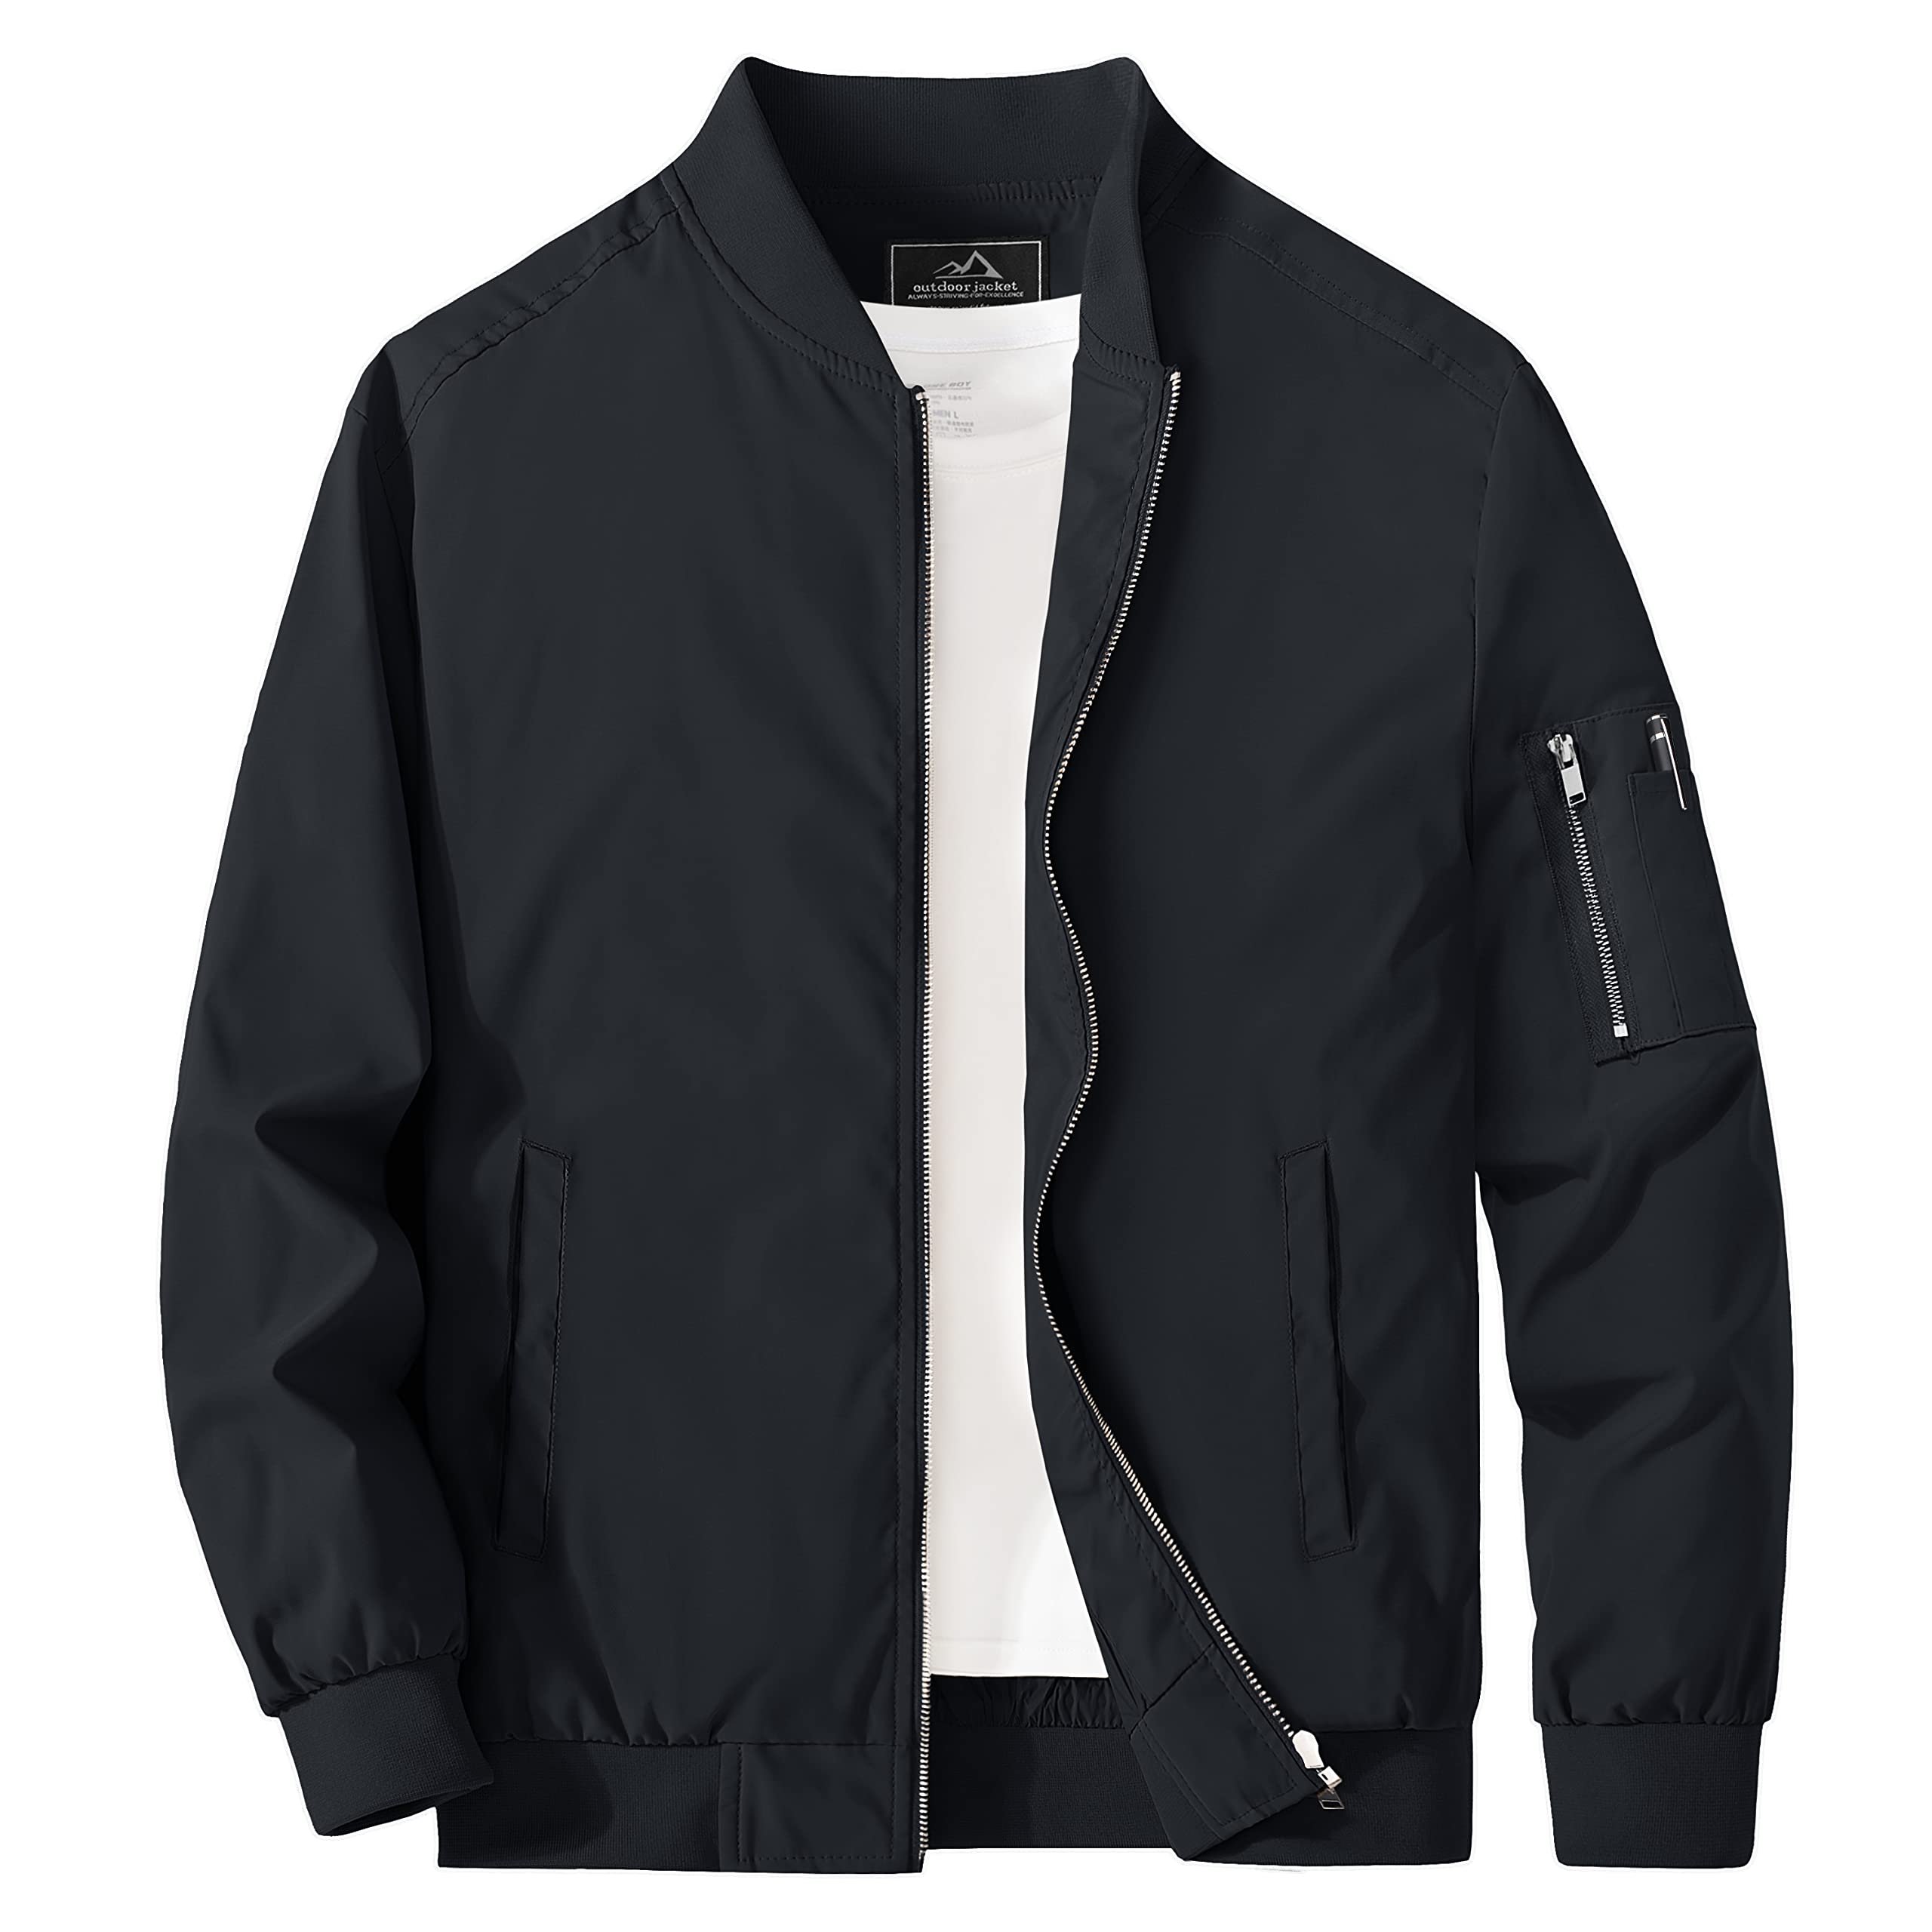 Men's light jacket are essential wardrobe pieces that combine style, functionality, and comfort in one versatile garment.